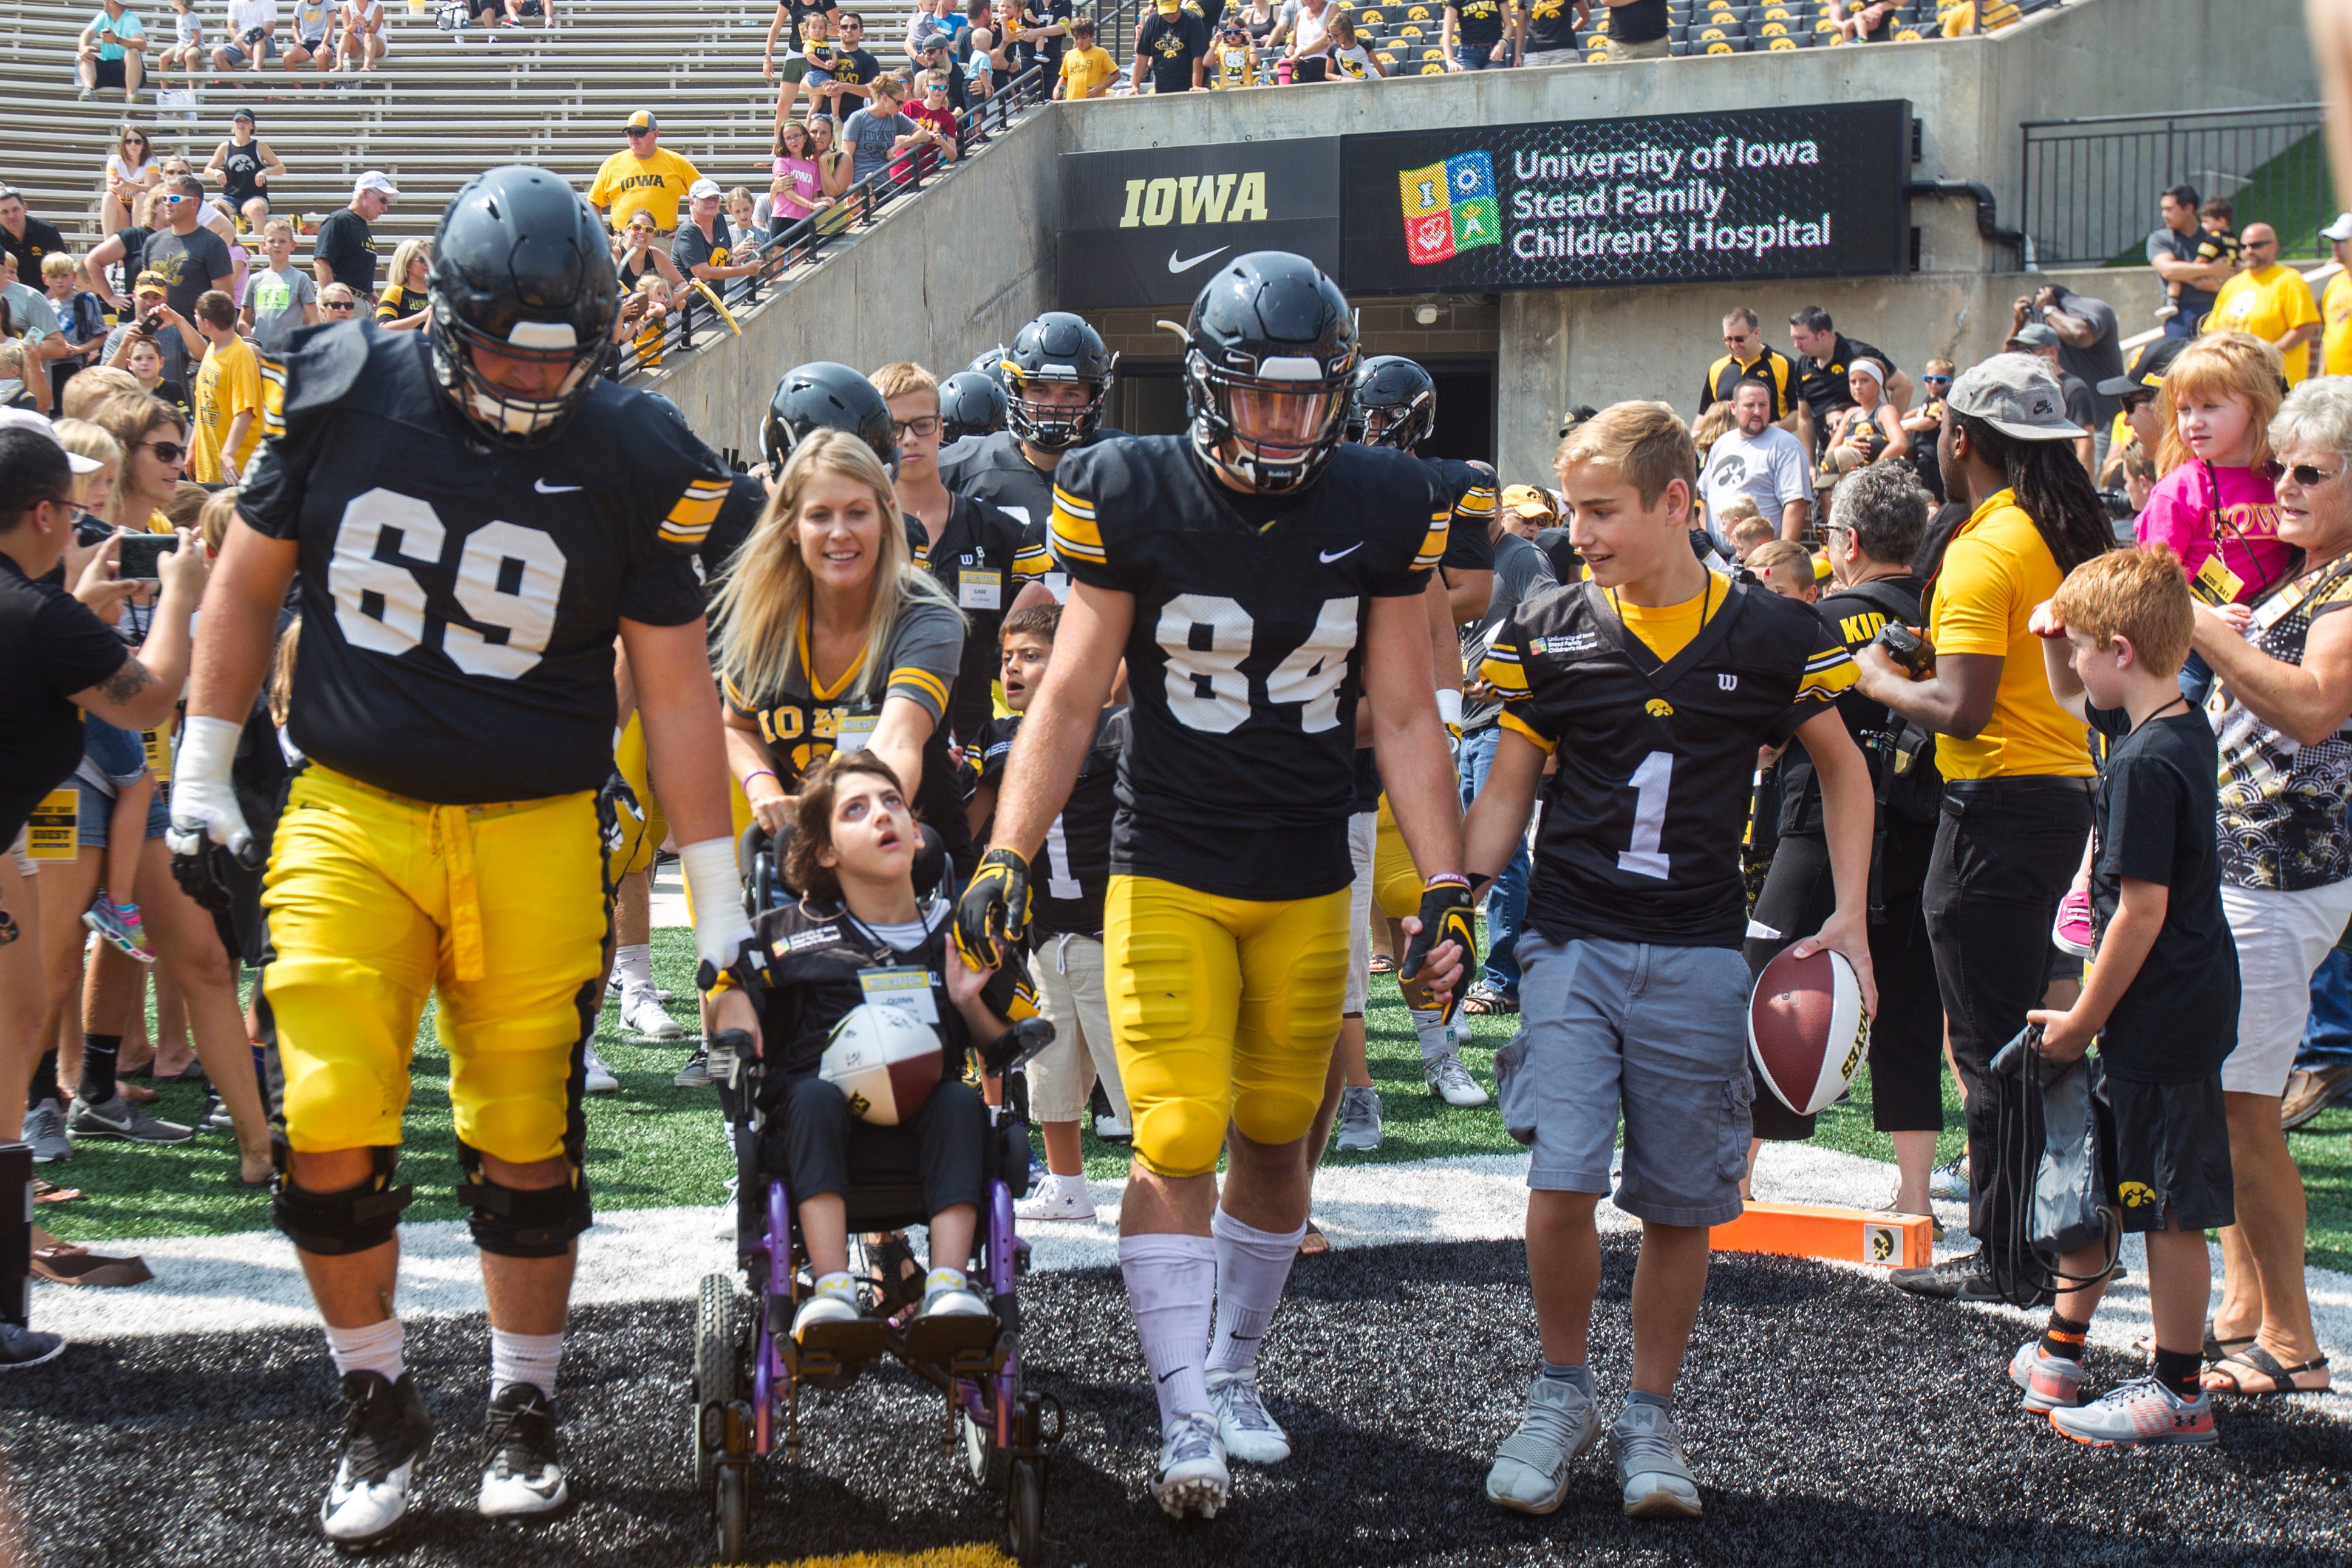 Iowa offensive lineman Keegan Render and wide receiver Nick Easley walk out of the tunnel with Kid Captains during a Kids Day practice on Saturday, Aug. 11, 2018, at Kinnick Stadium in Iowa City.